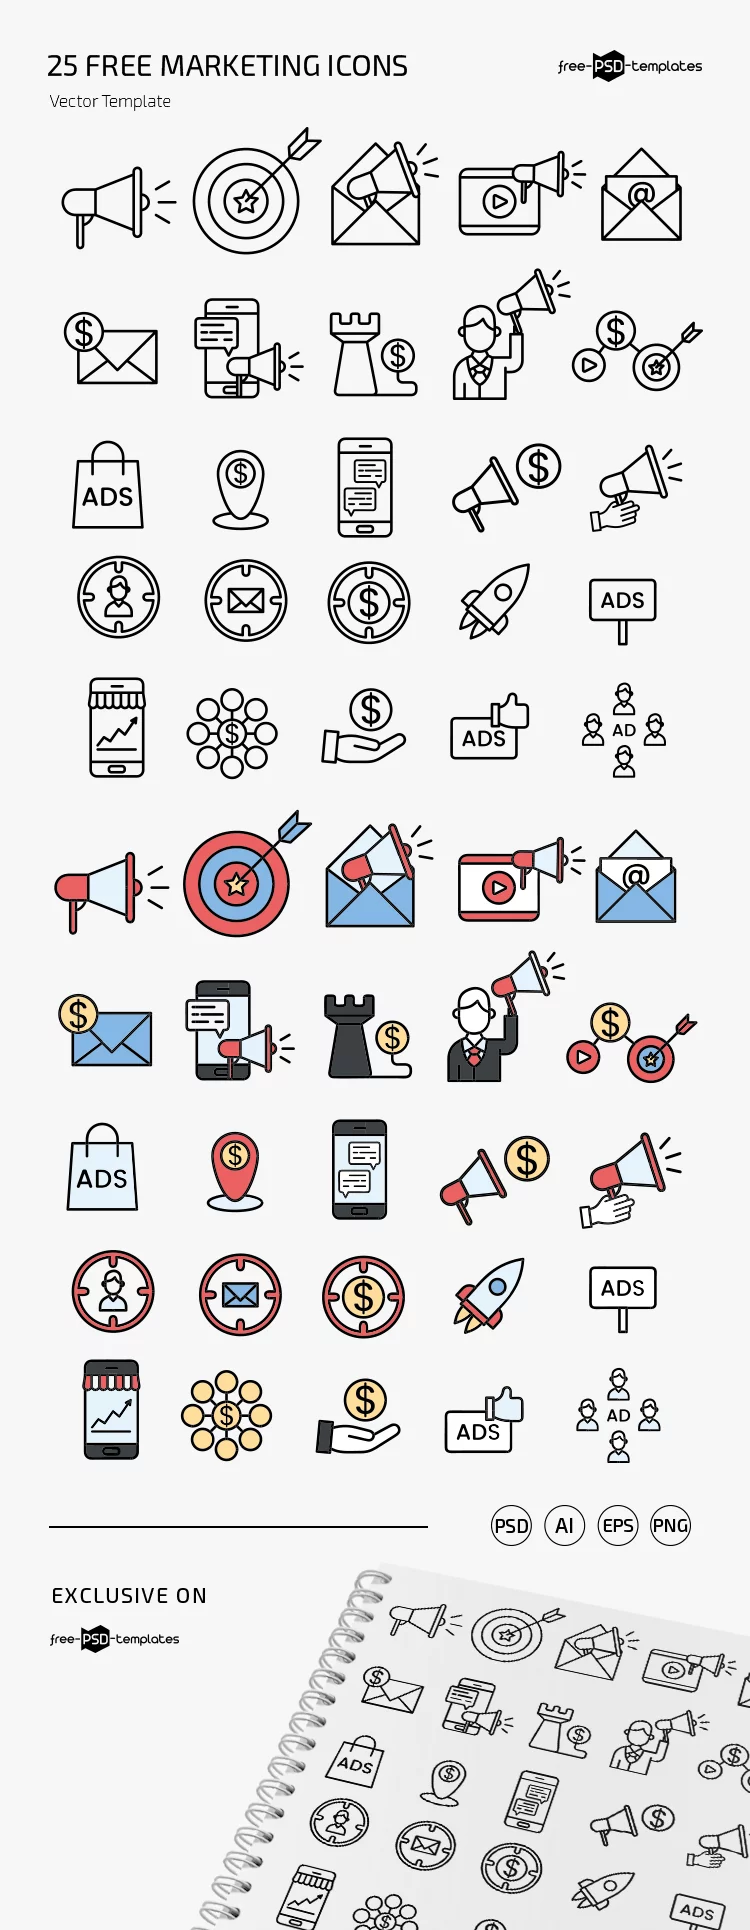 Free Marketing Icons Templates in EPS + PSD